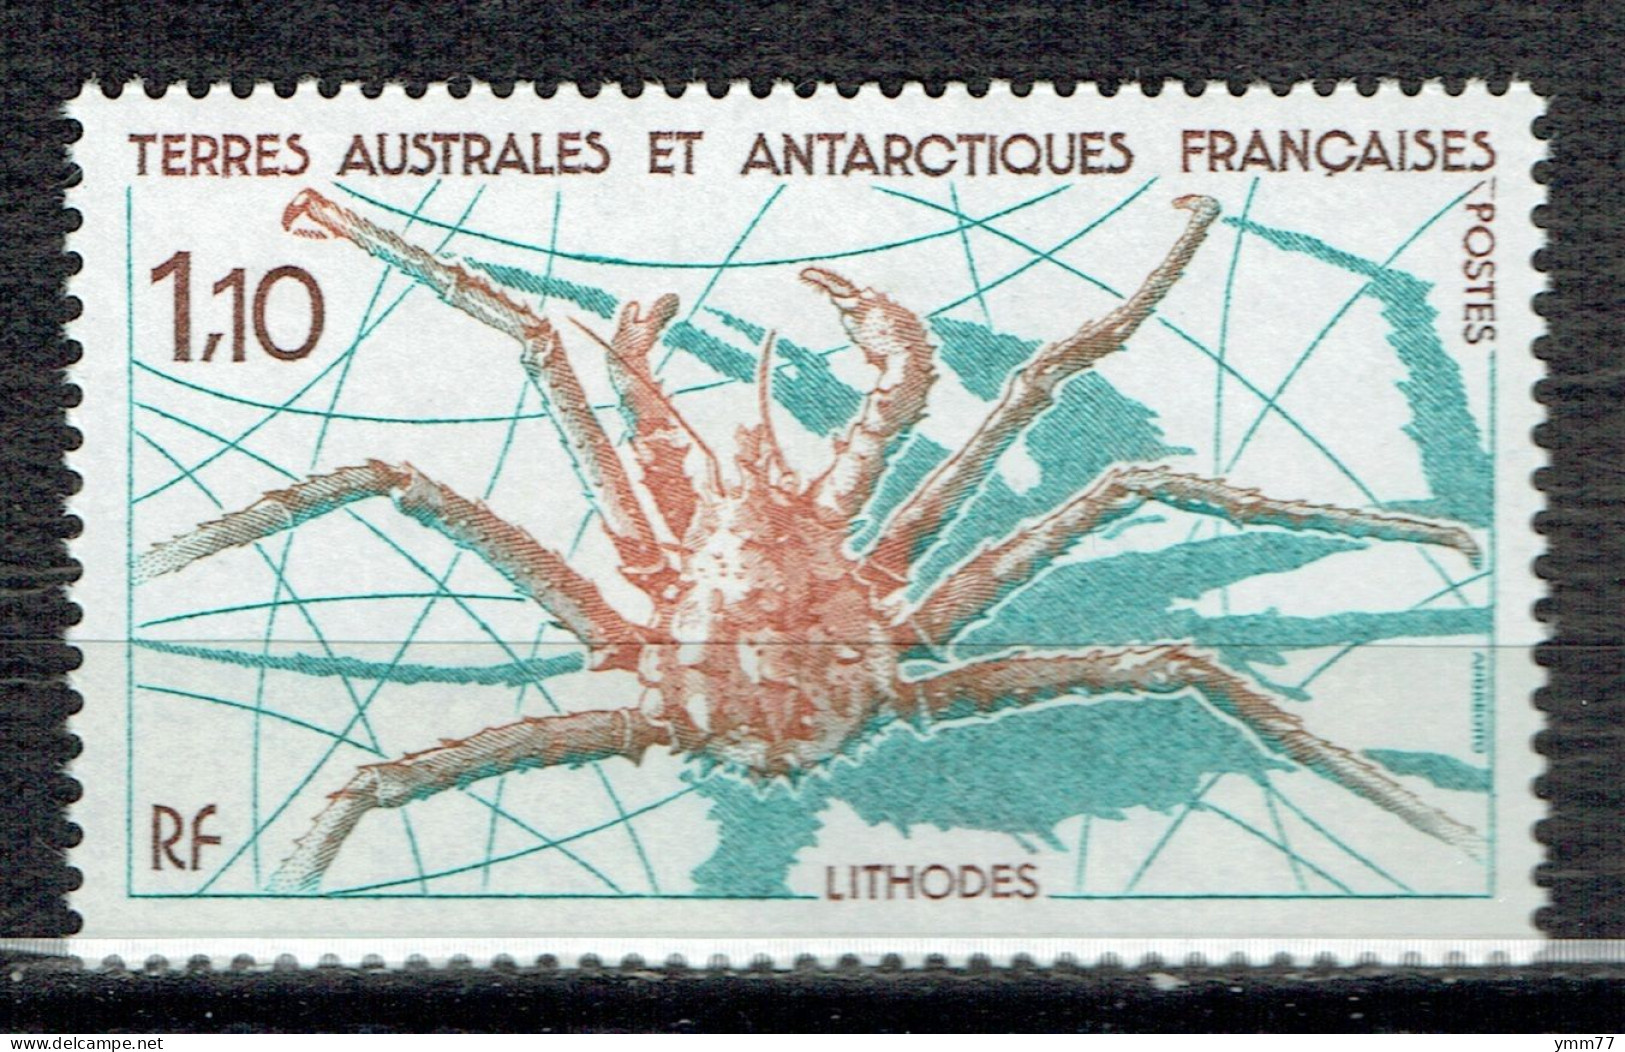 Faune : Lithodes - Unused Stamps